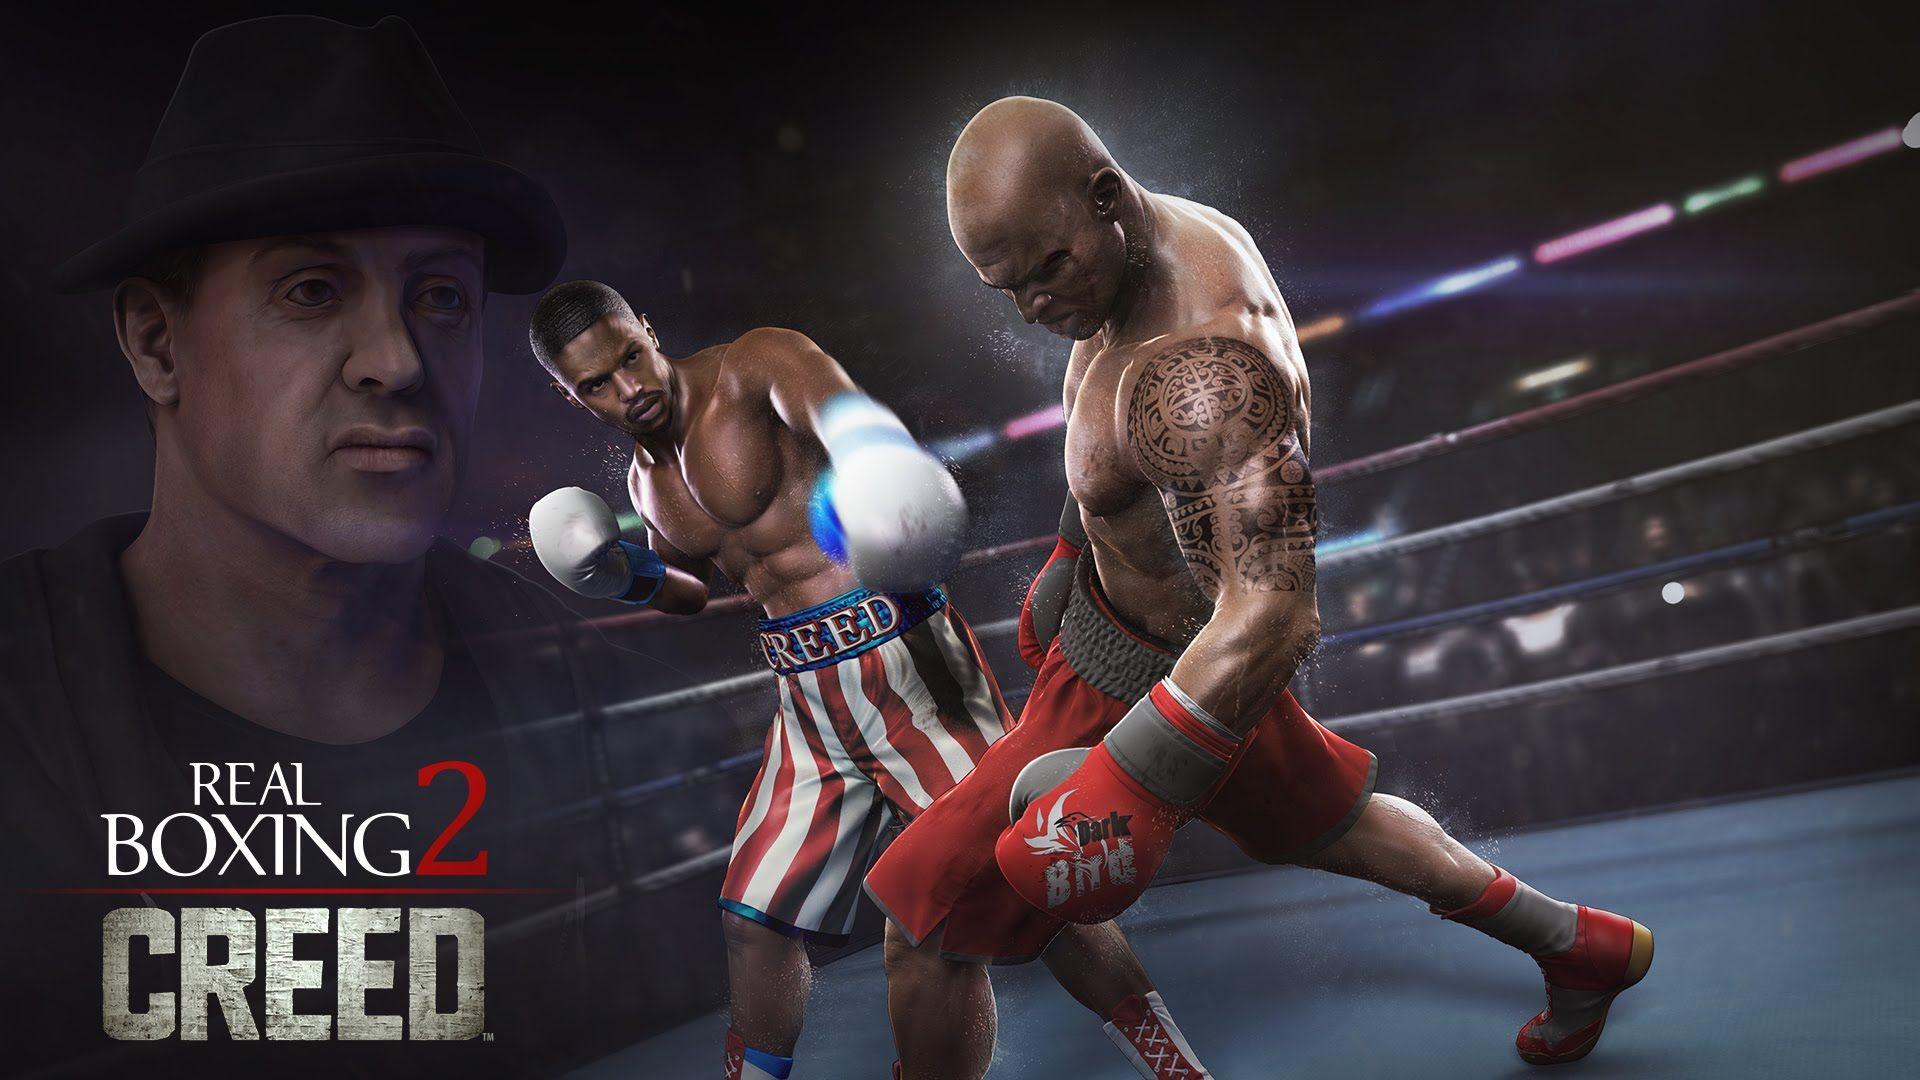 Go real game. Real Boxing 2 Creed. Real Boxing 2 боксеры. Real Boxing 2 Rocky (real Boxing 2 Creed)трейлер. Бокс на Xbox Rocky.